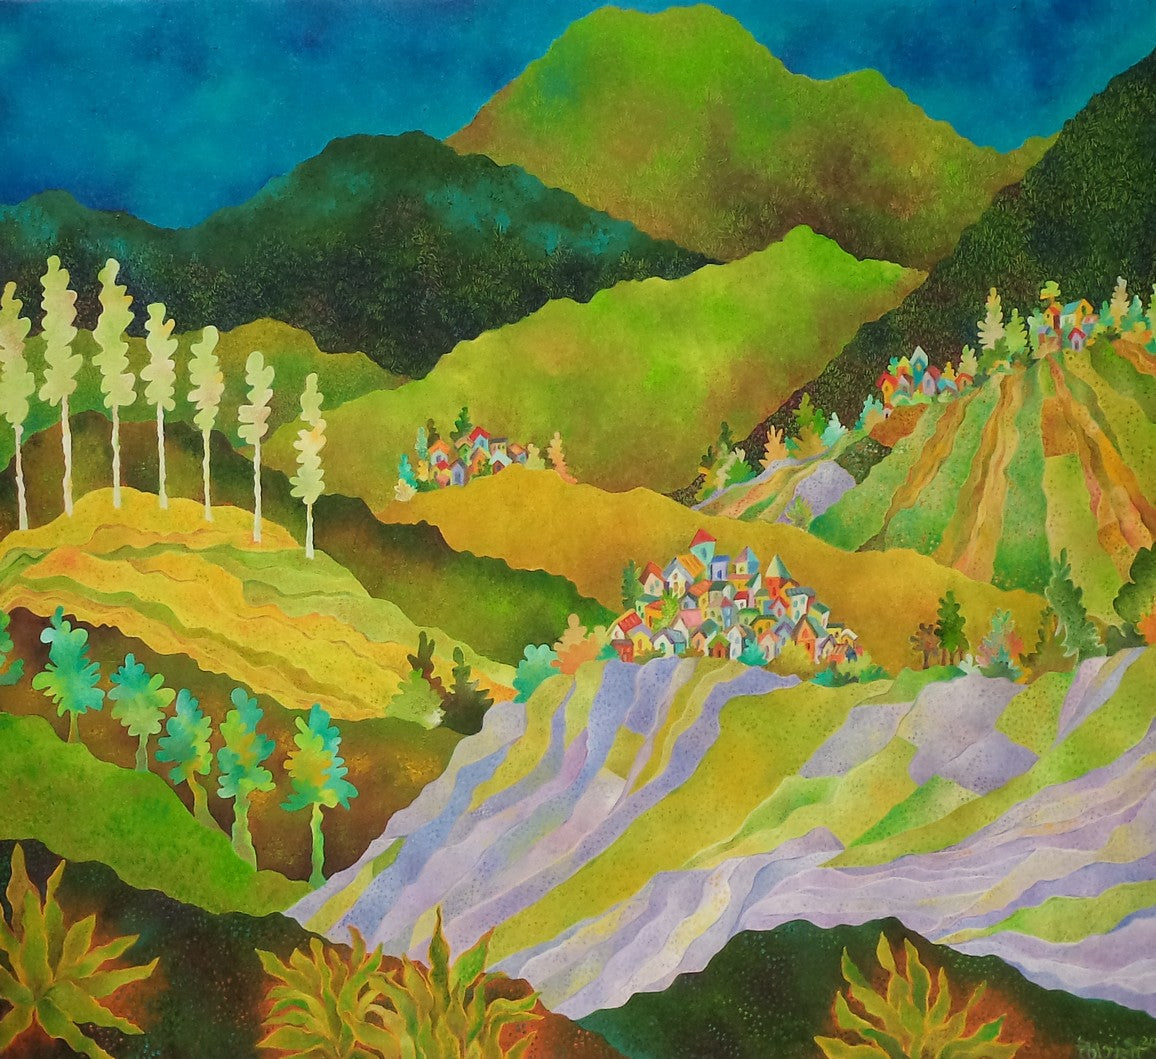 'LAVENDER AND LEMON GRASS FIELDS' - Oil on canvas